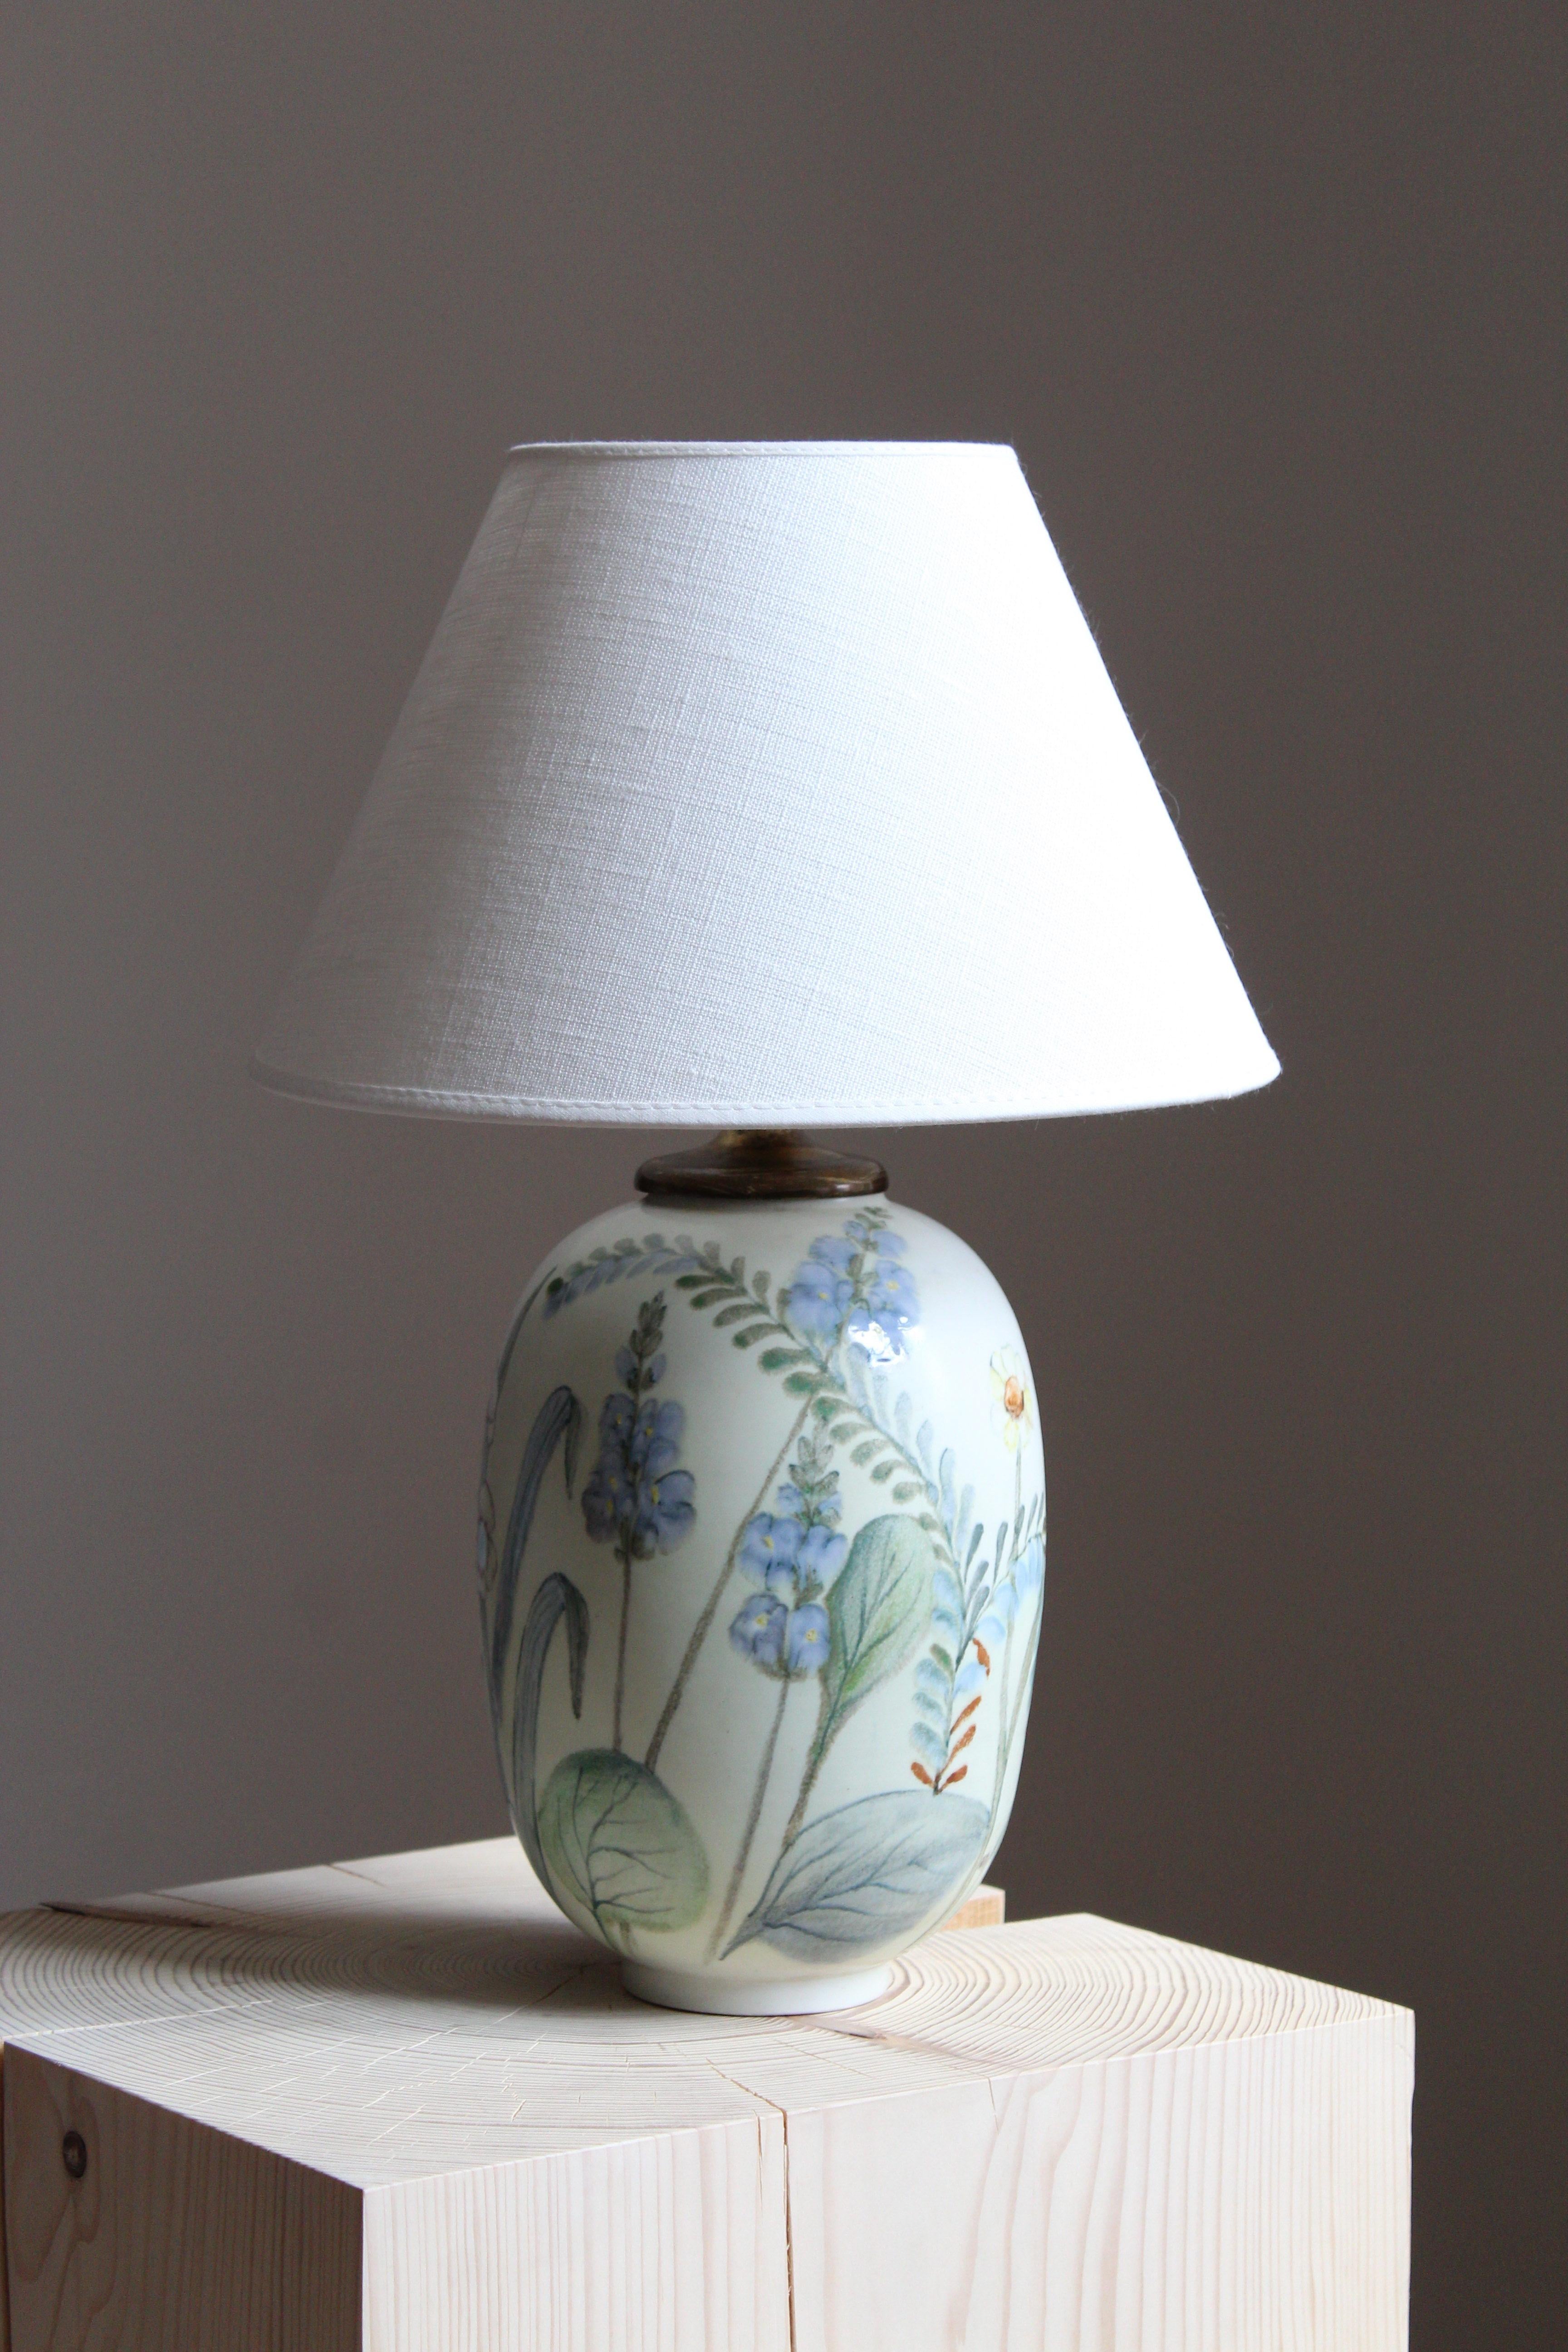 A rare and sizable table lamp by Carl-Harry Stålhane for the iconic Swedish firm Rörstrand. Features hand painted floral motifs, 1950s, Sweden. Marked.

Sold without lampshade. Stated dimensions excluding lampshade.

Glaze features green-blue-white